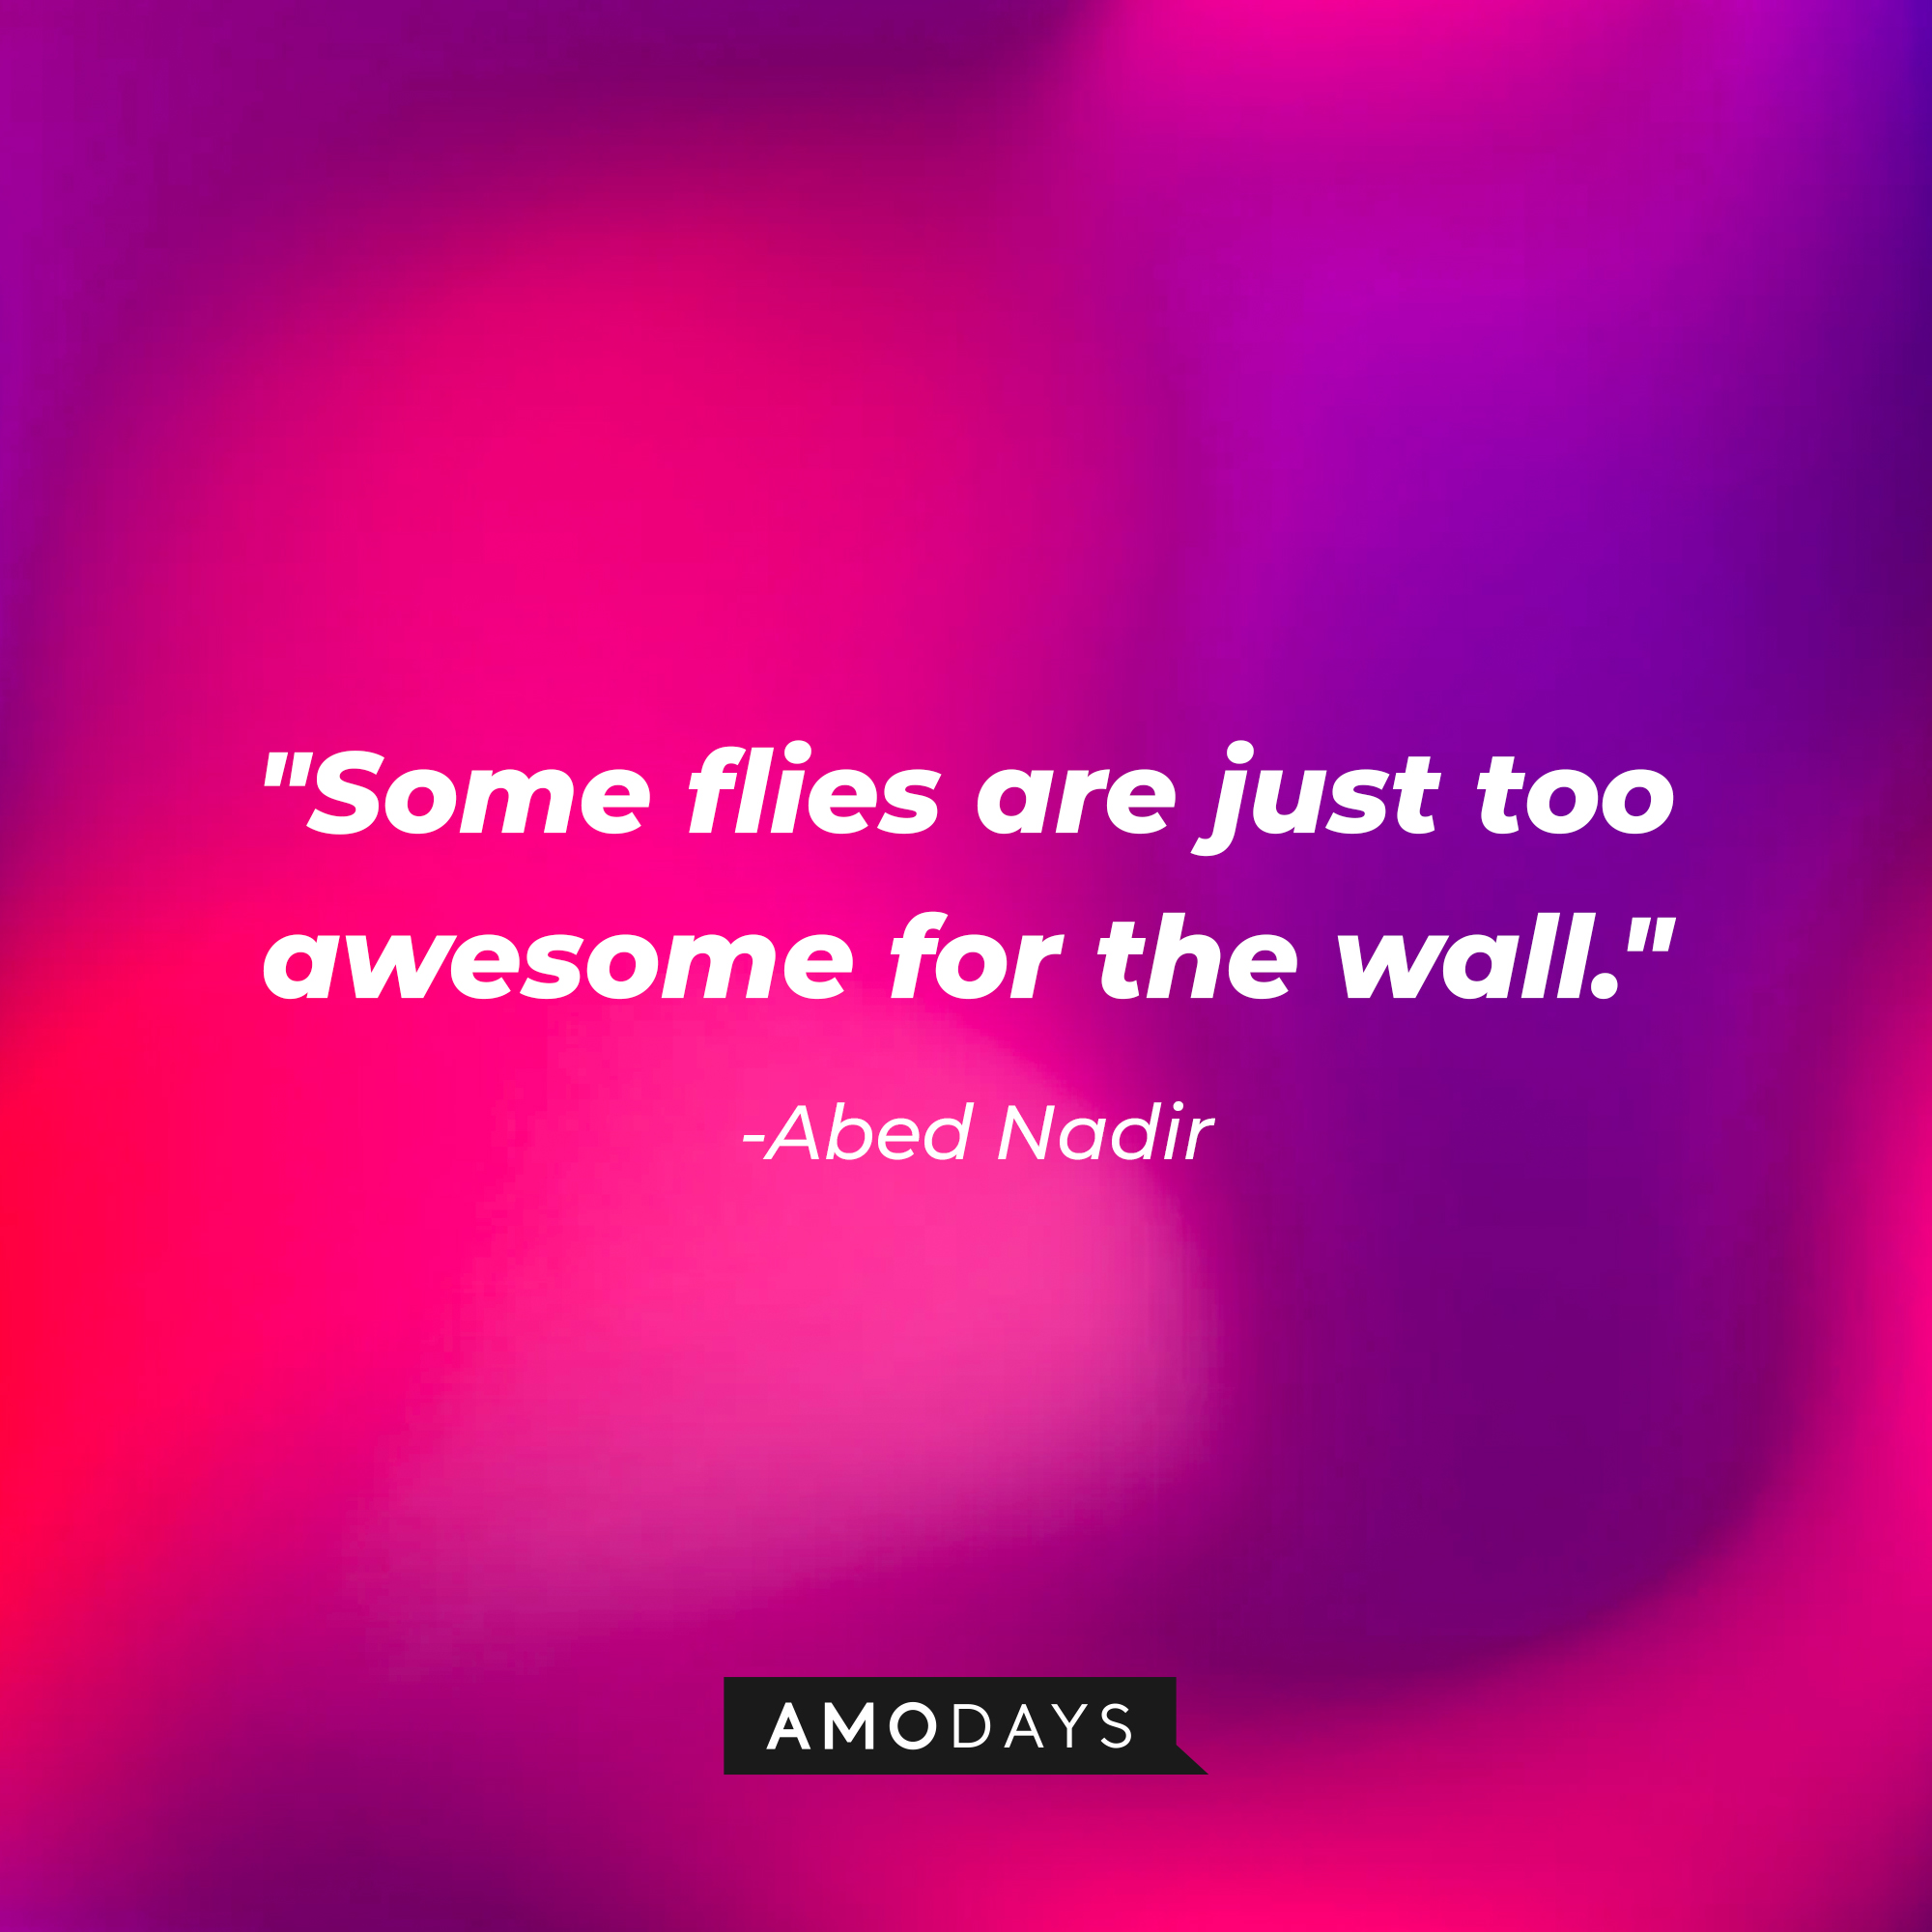 Abed Nadir’s quote: "Some flies are just too awesome for the wall." | Source: AmoDays